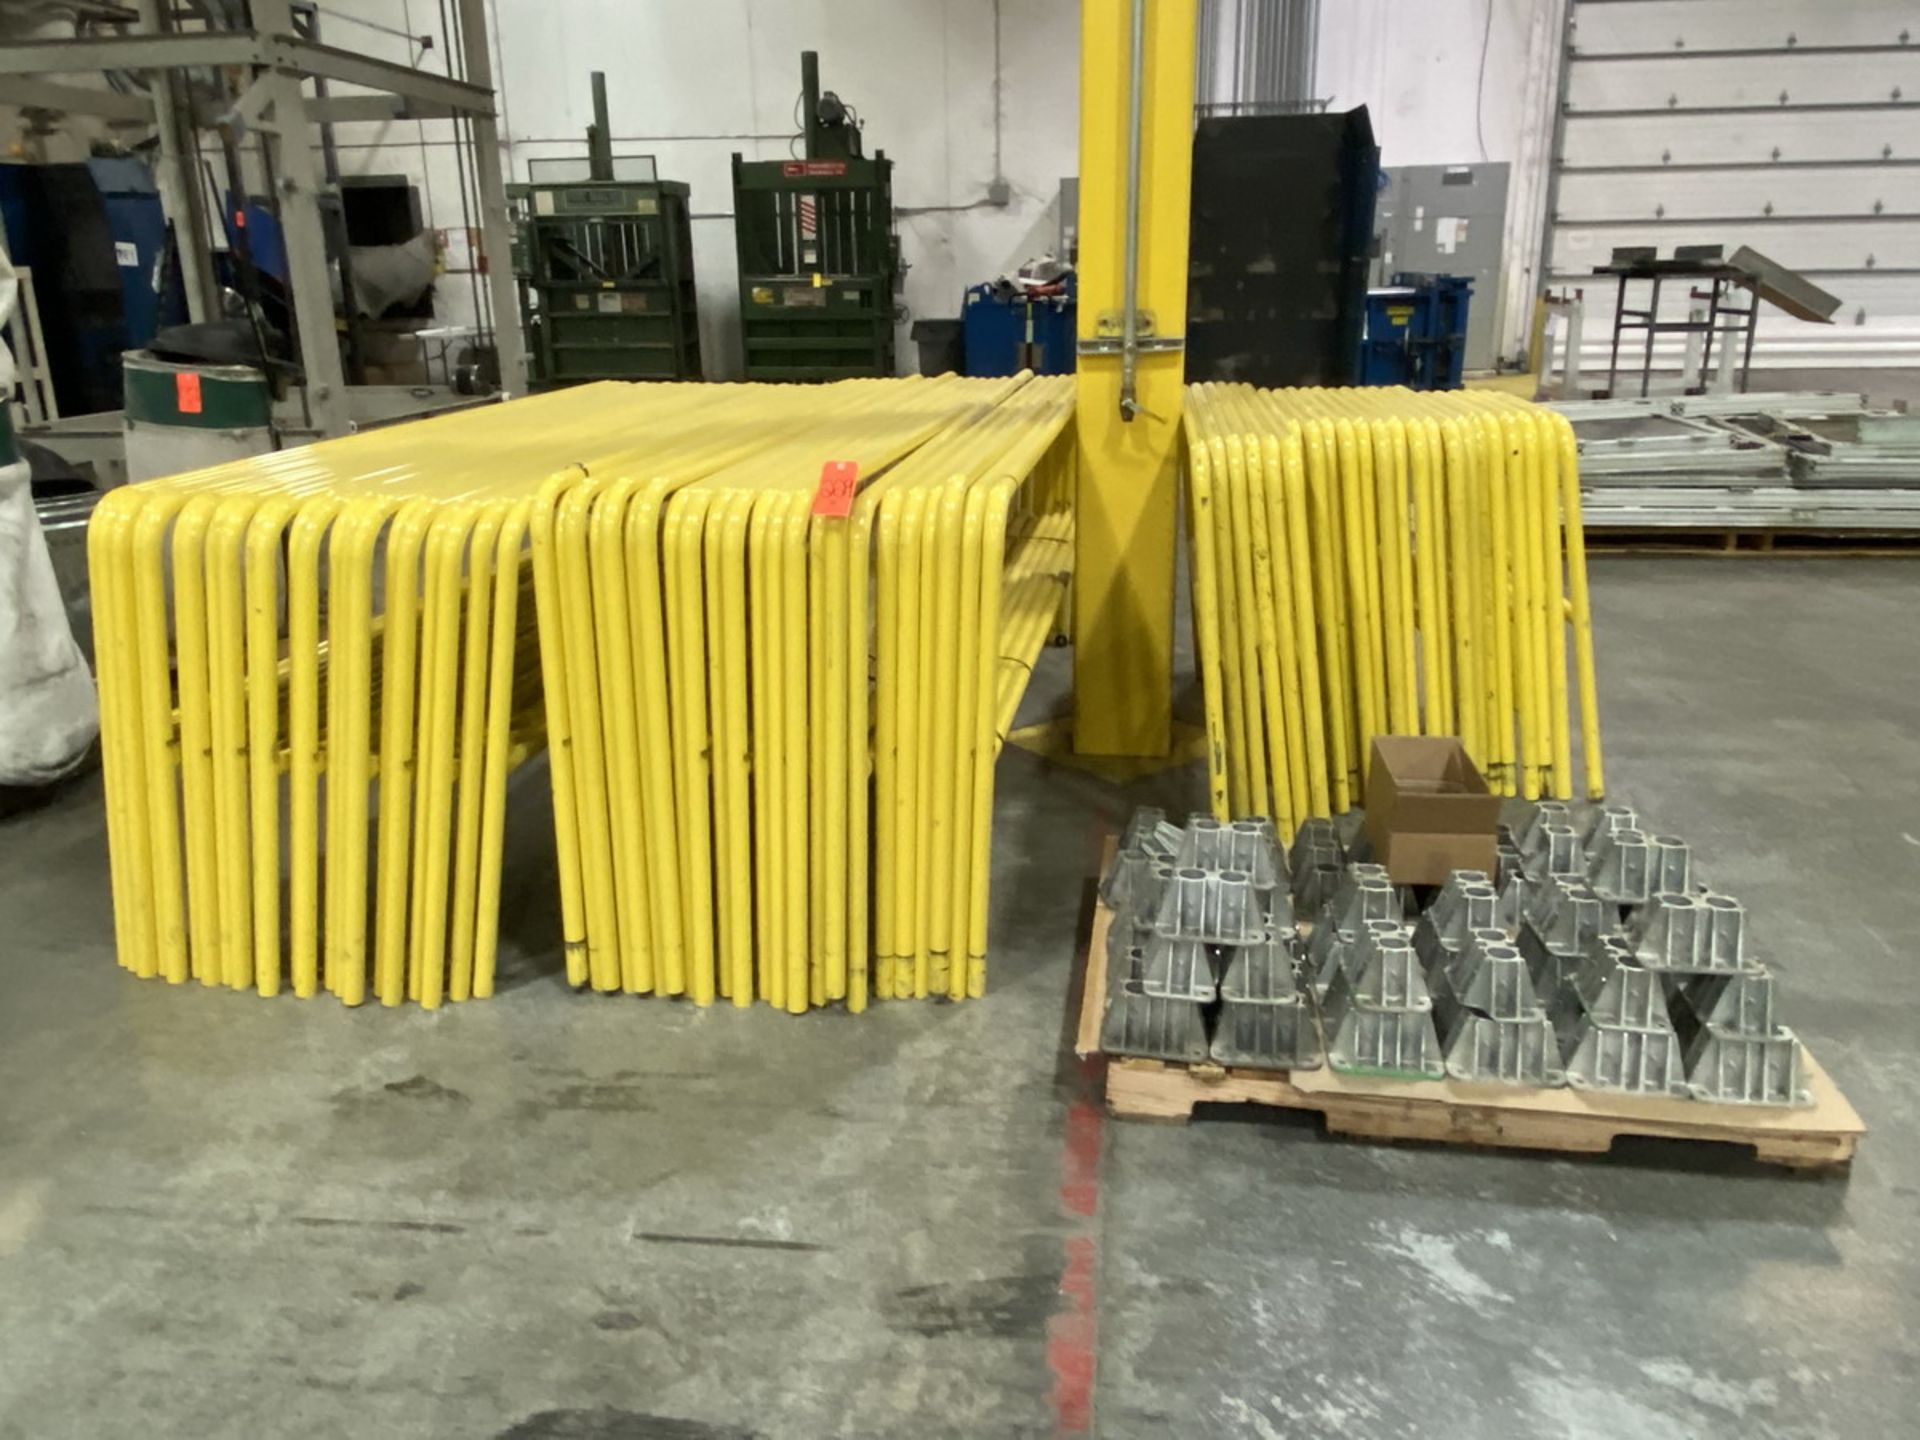 Lot - Various Size Safety Rails, Ranging from 117 in. long to 67 in. long, and 42 in. long with (